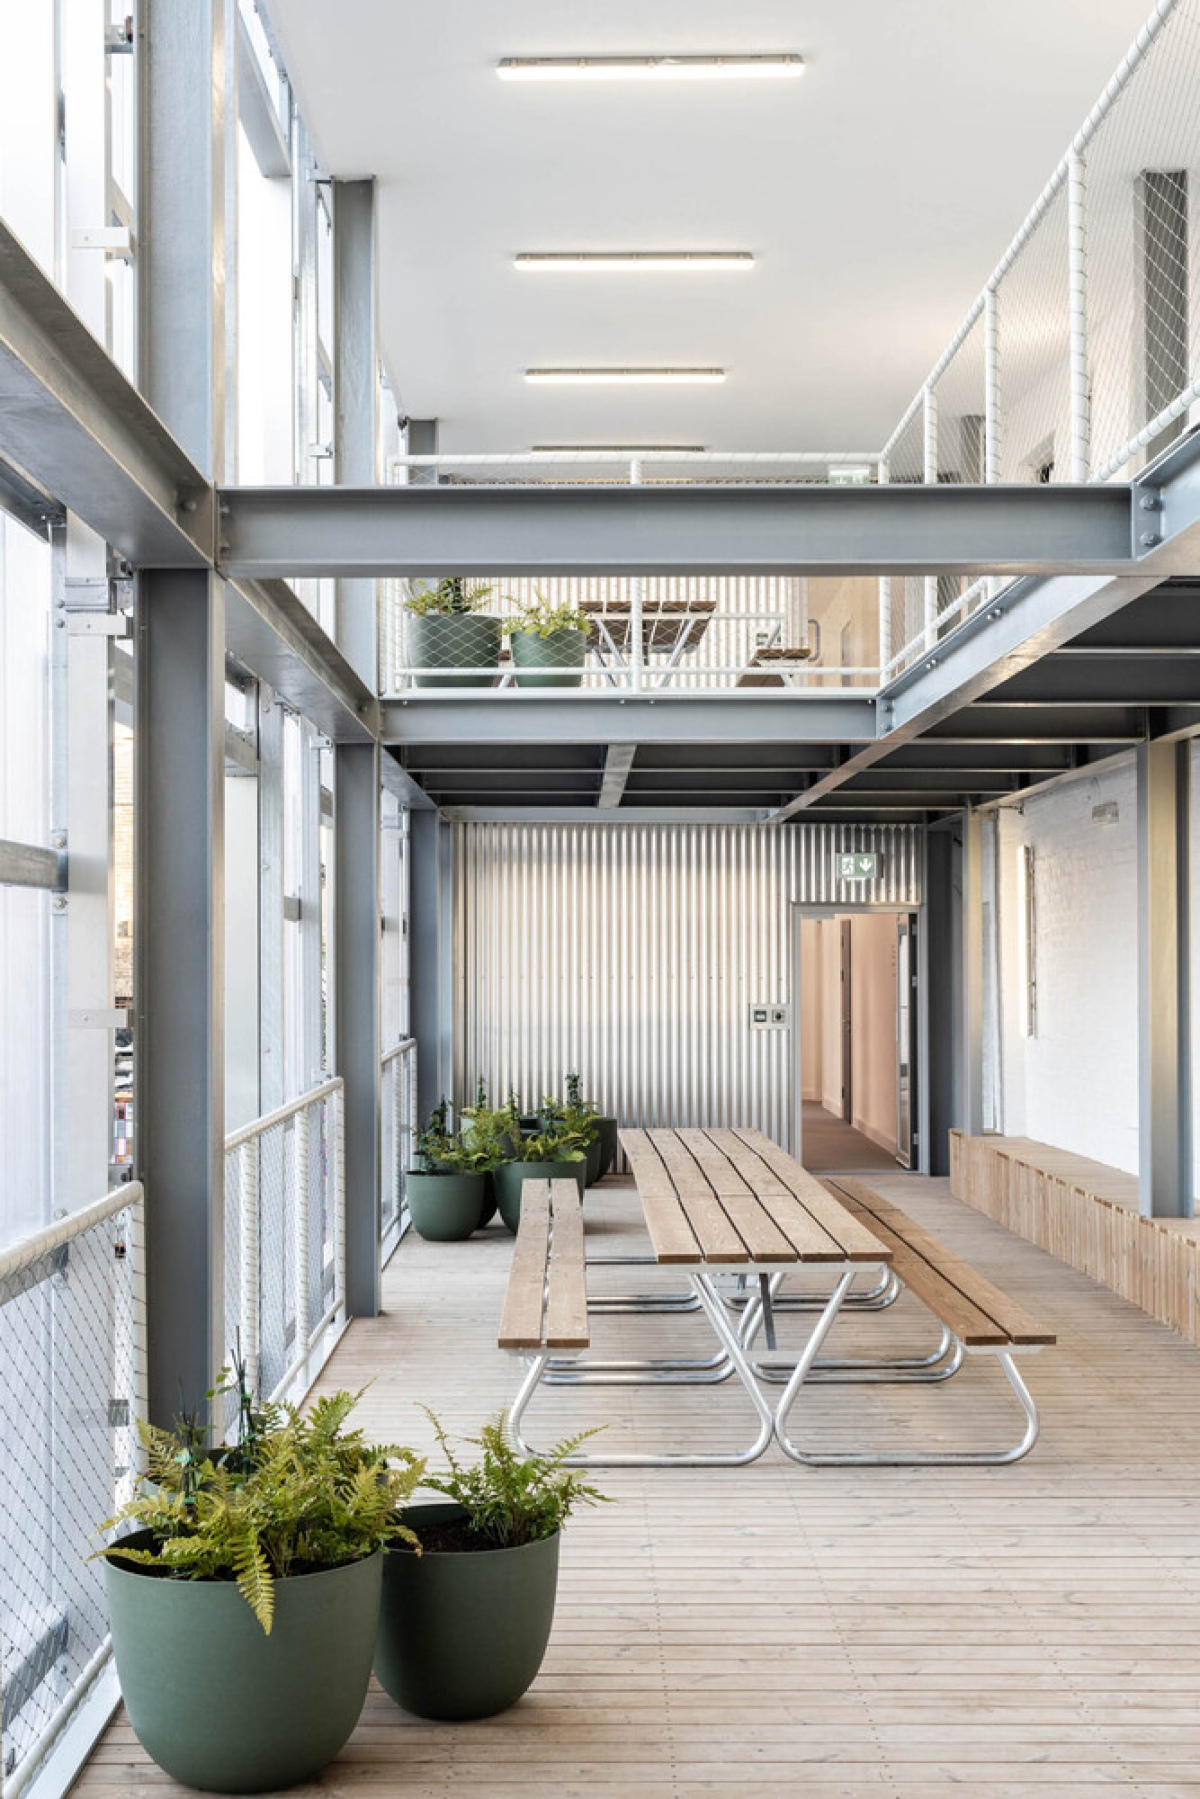 Bradbury Works, Gillett Square, Dalston, refurbished, affordable workspace, flexible spaces, Victorian terrace, collaborative environment, refurbished entrance,polycarbonate facade, reflective, 

